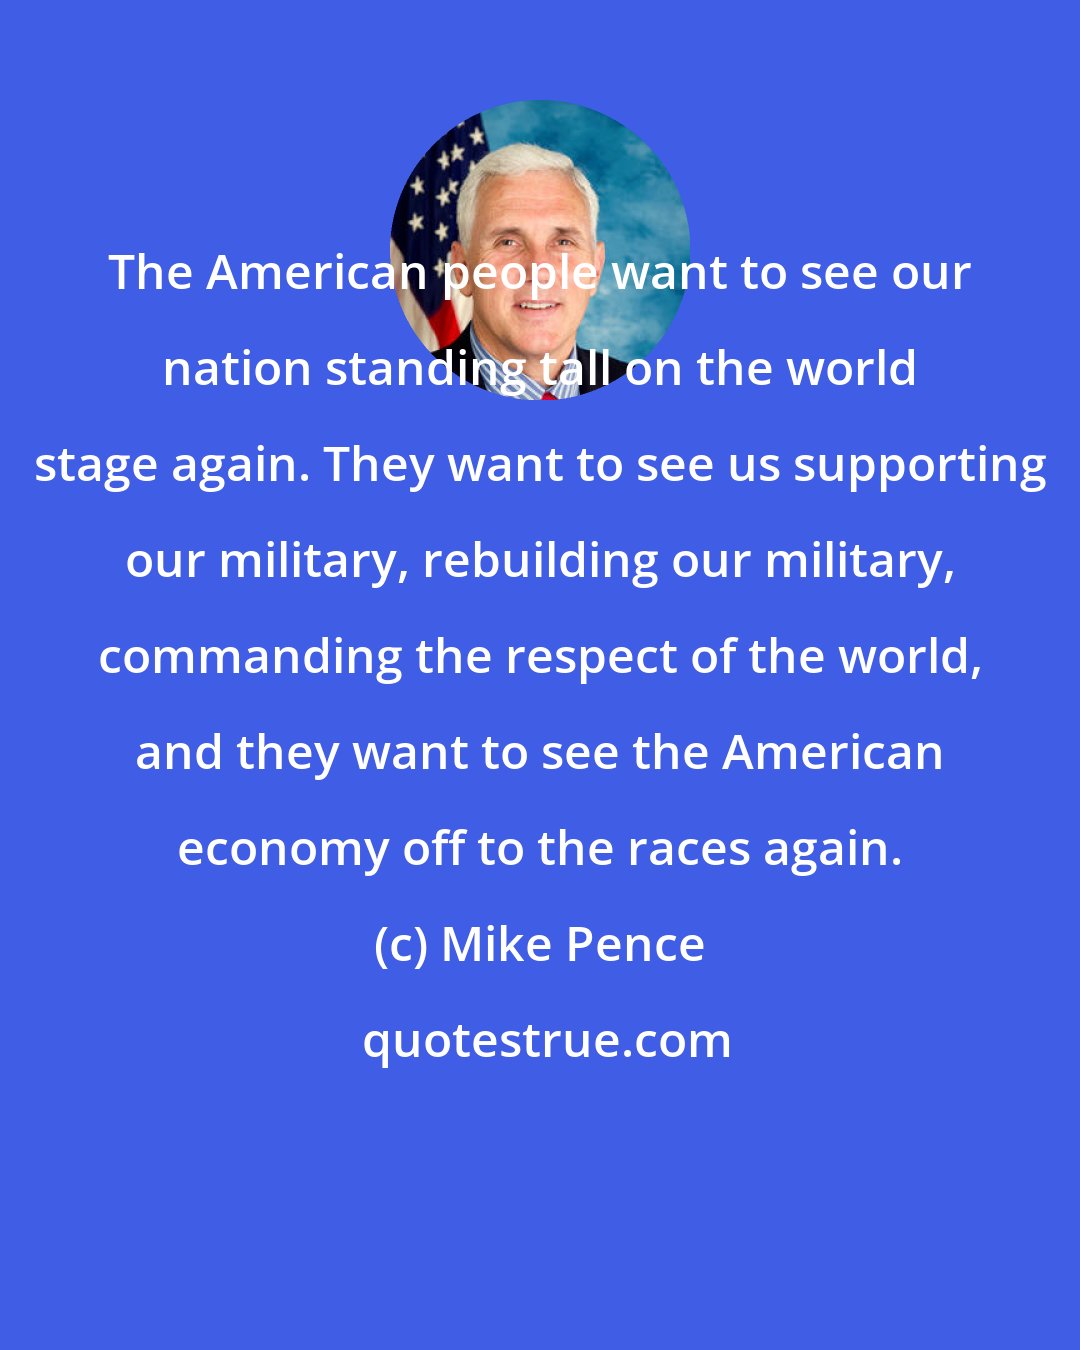 Mike Pence: The American people want to see our nation standing tall on the world stage again. They want to see us supporting our military, rebuilding our military, commanding the respect of the world, and they want to see the American economy off to the races again.